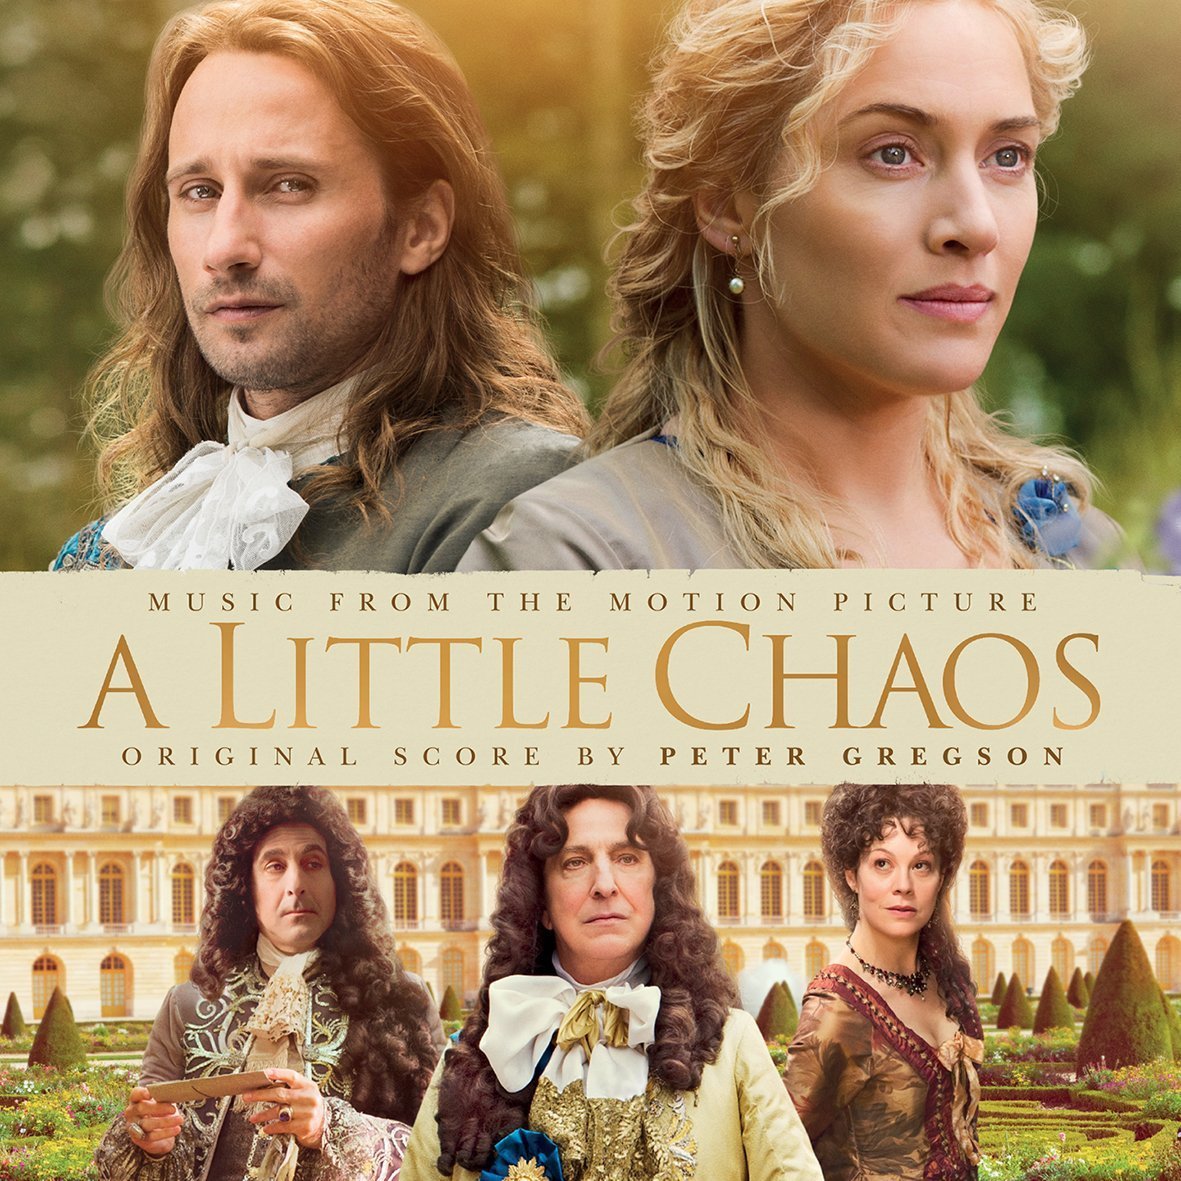 Film Review A Little Chaos (2015) The Seventeenth